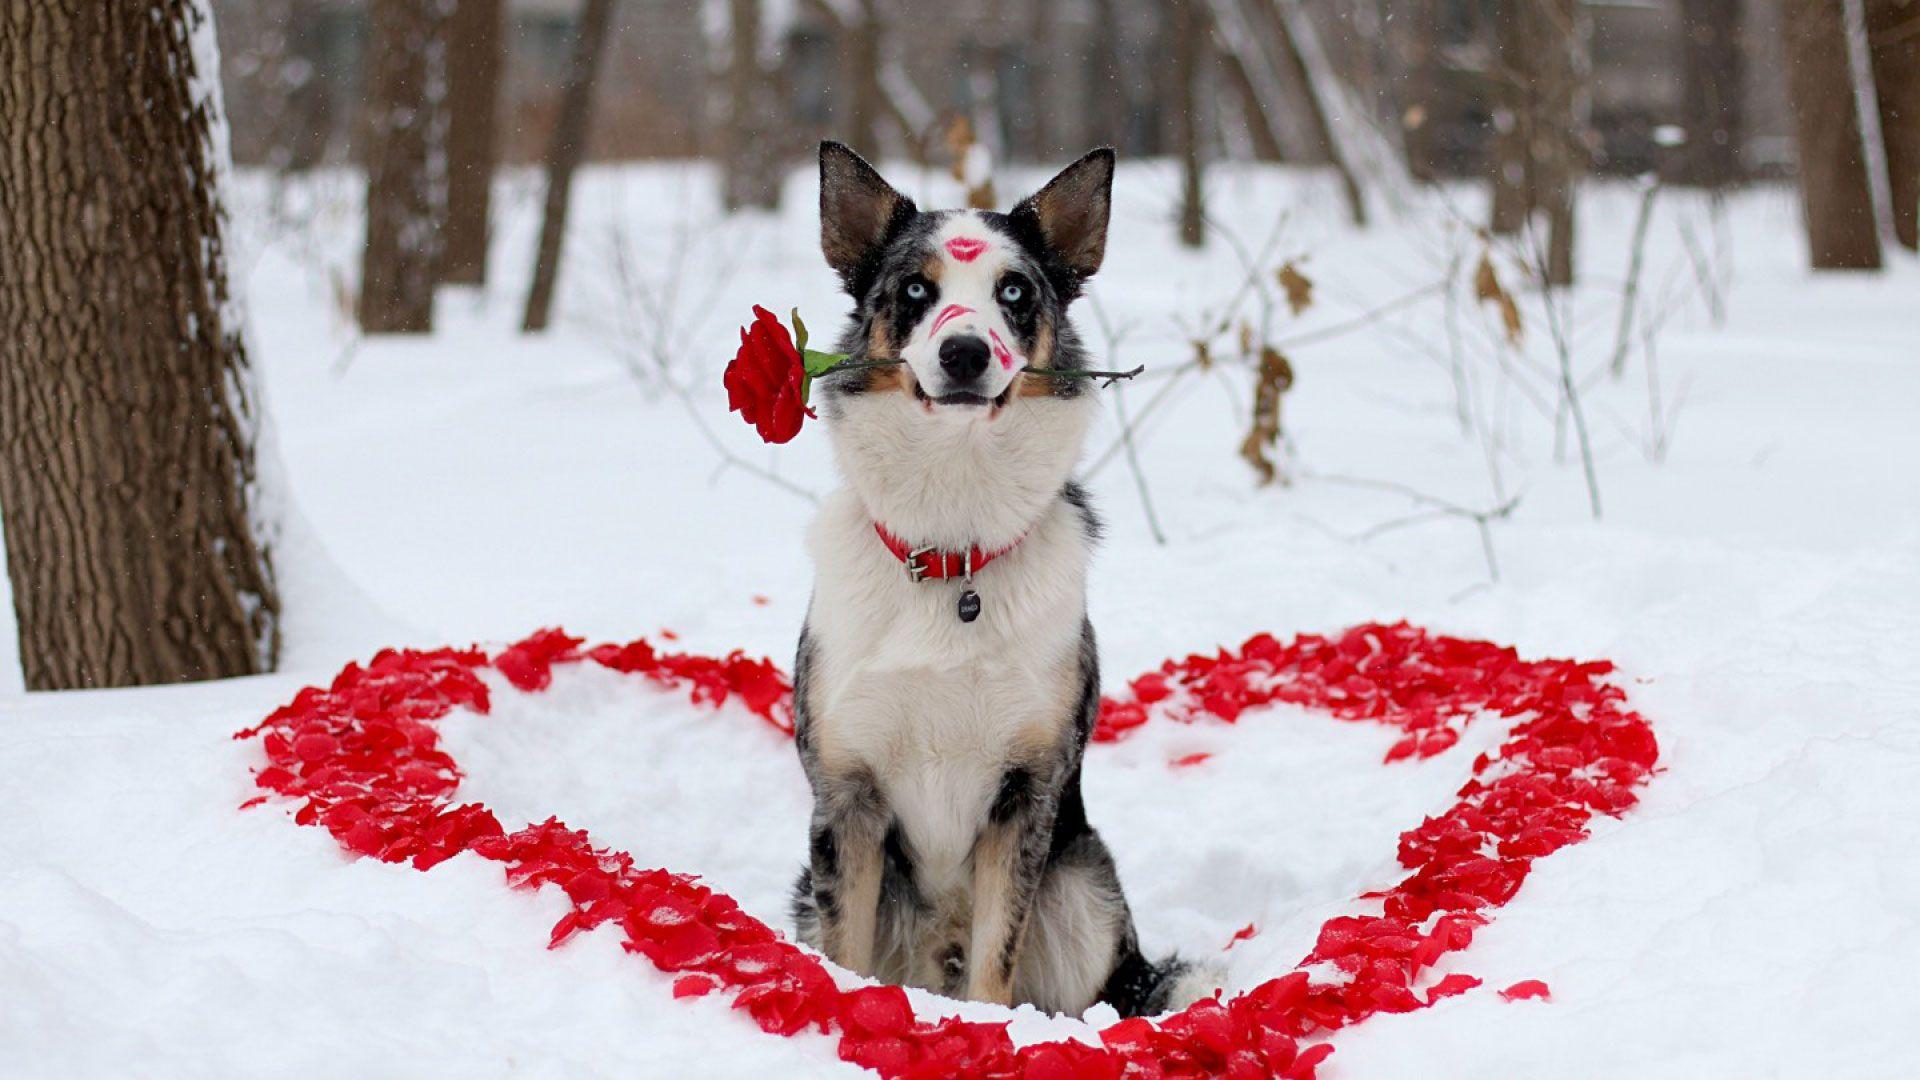 hd pics photo best stunning valentines day flower dog love heart rose petals rose flower lips HD quality desktop ba. Dog flower, Pretty dogs, Cat animal picture